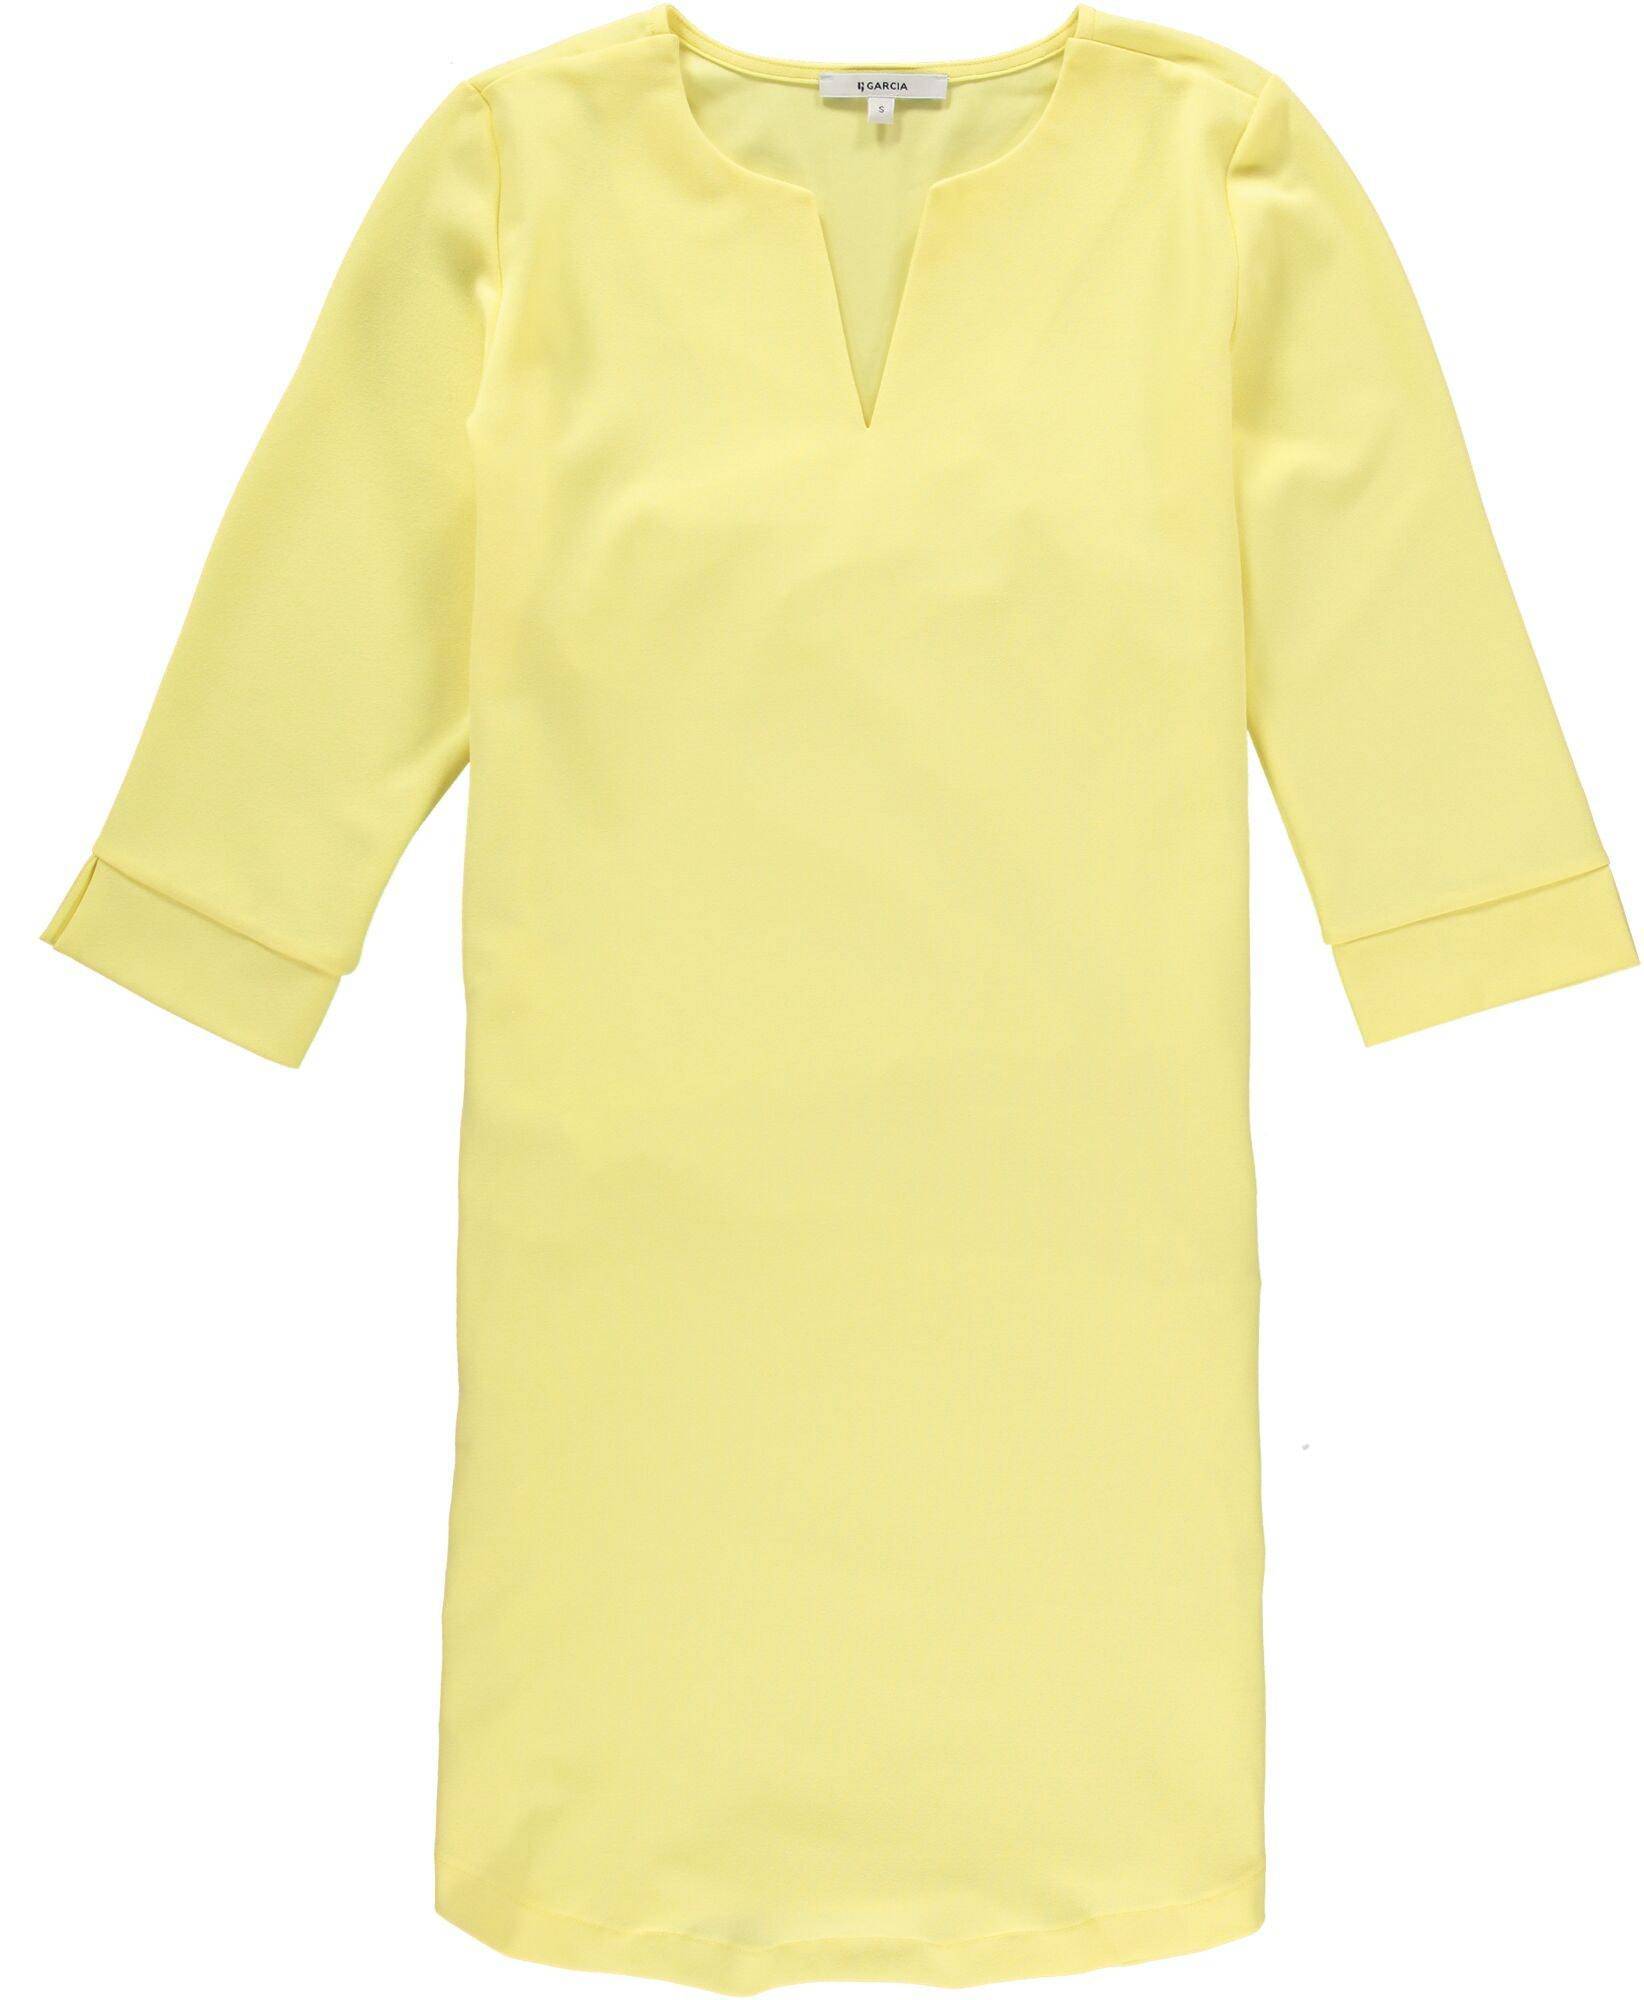 Lemon Yellow Garcia Dress - Your Style Your Story